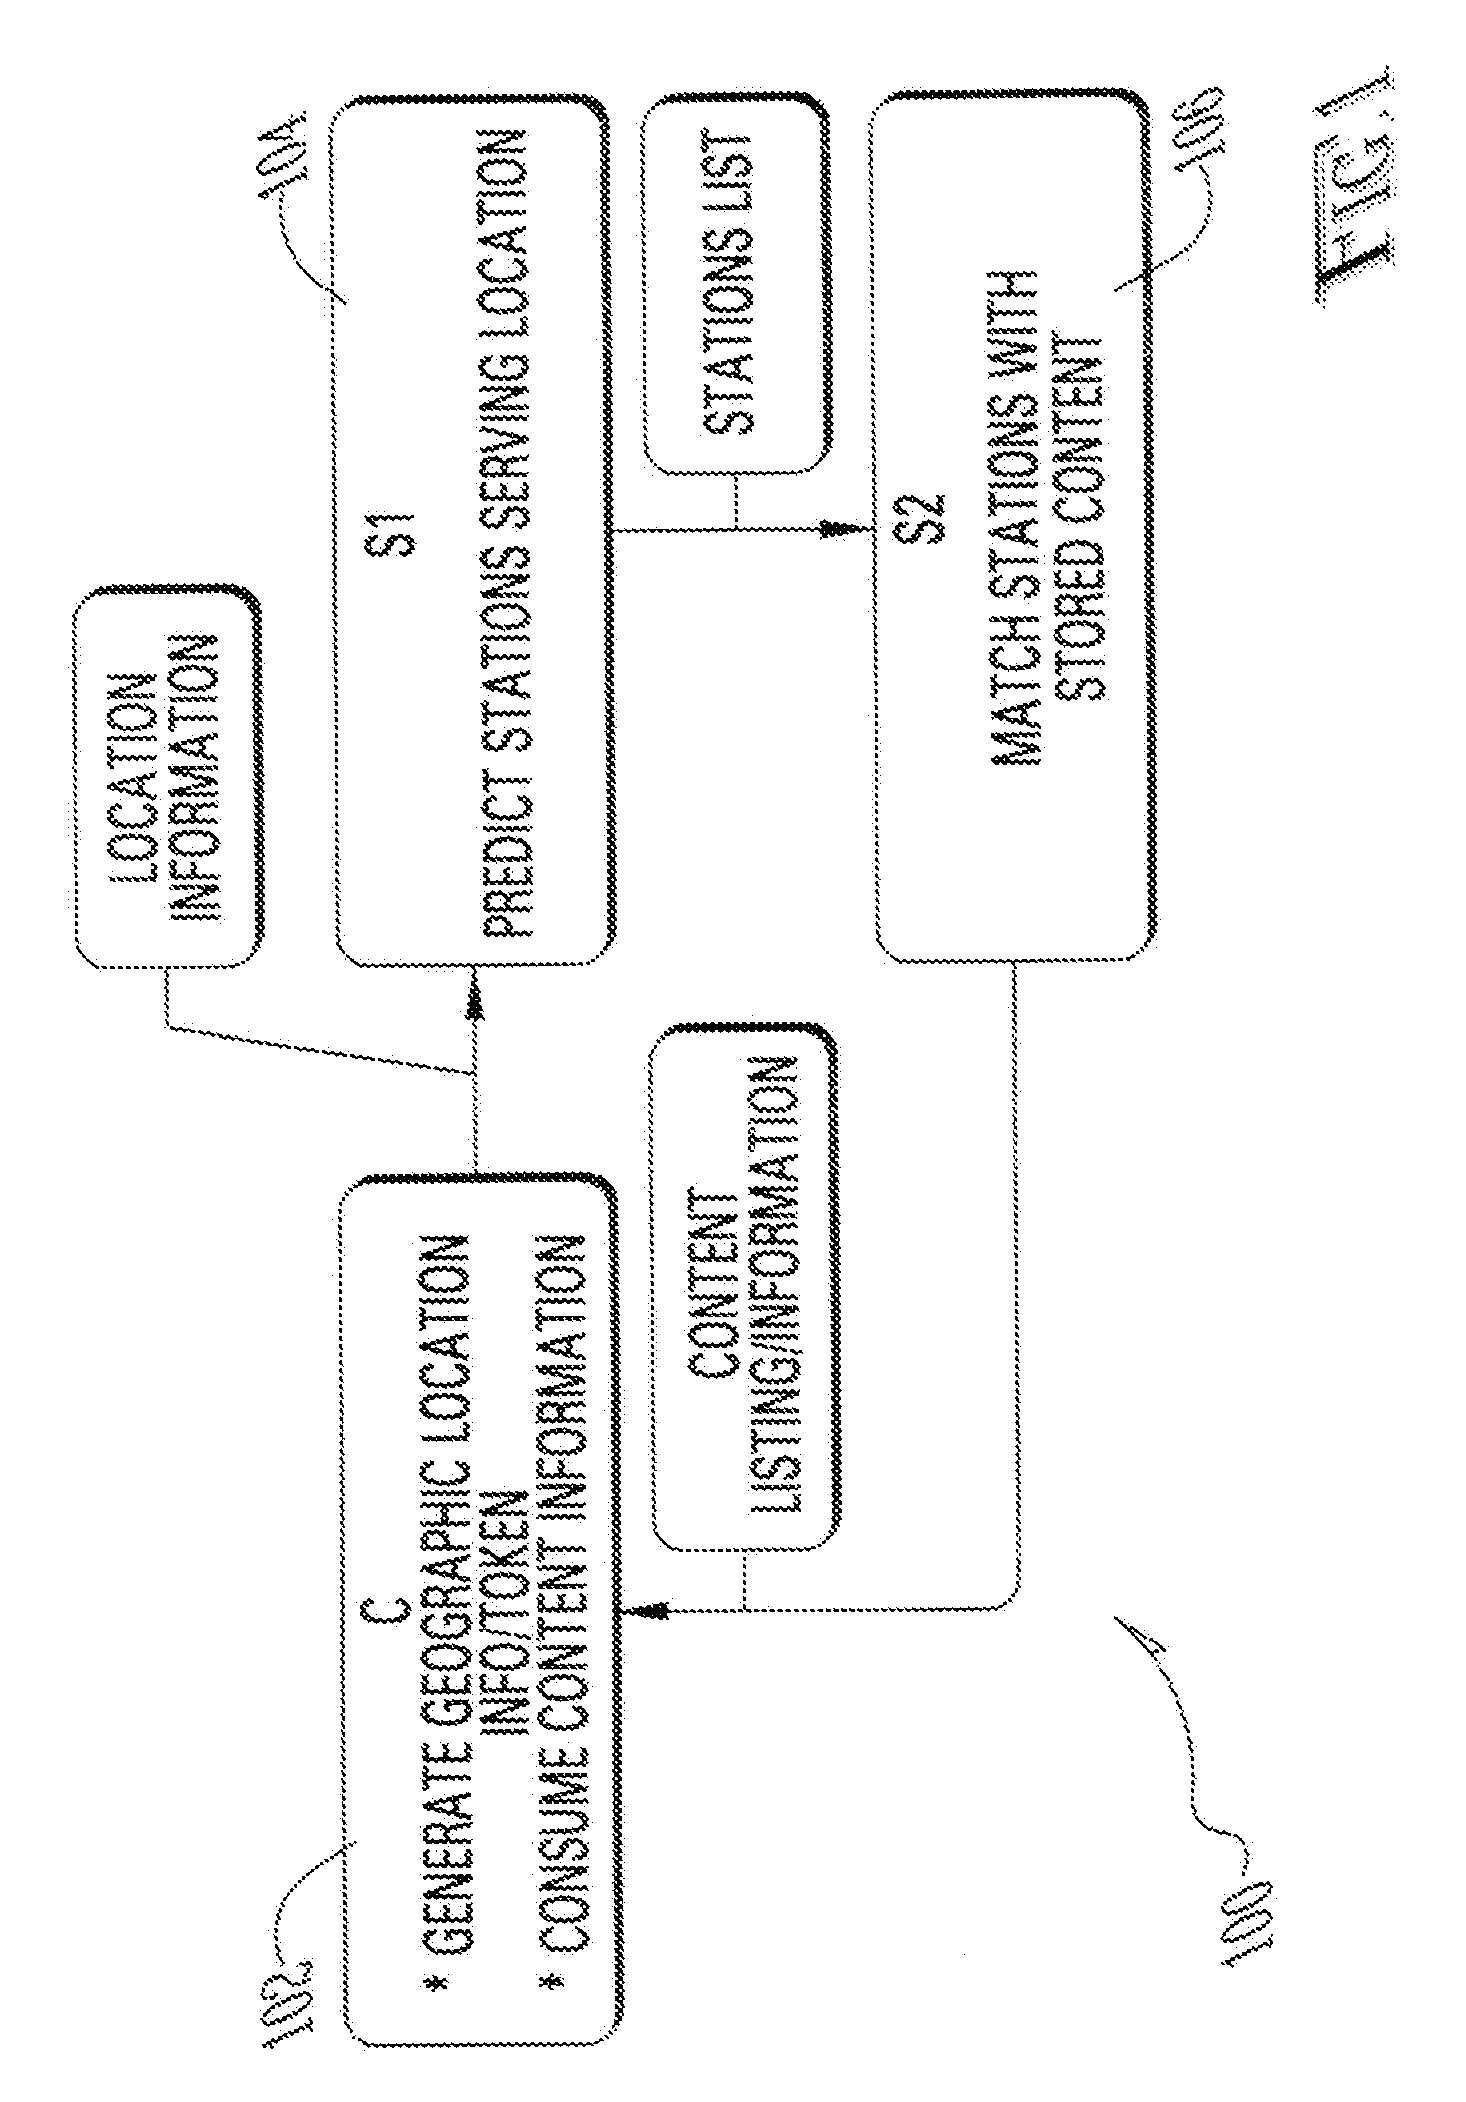 Method and system for creating television programming guide